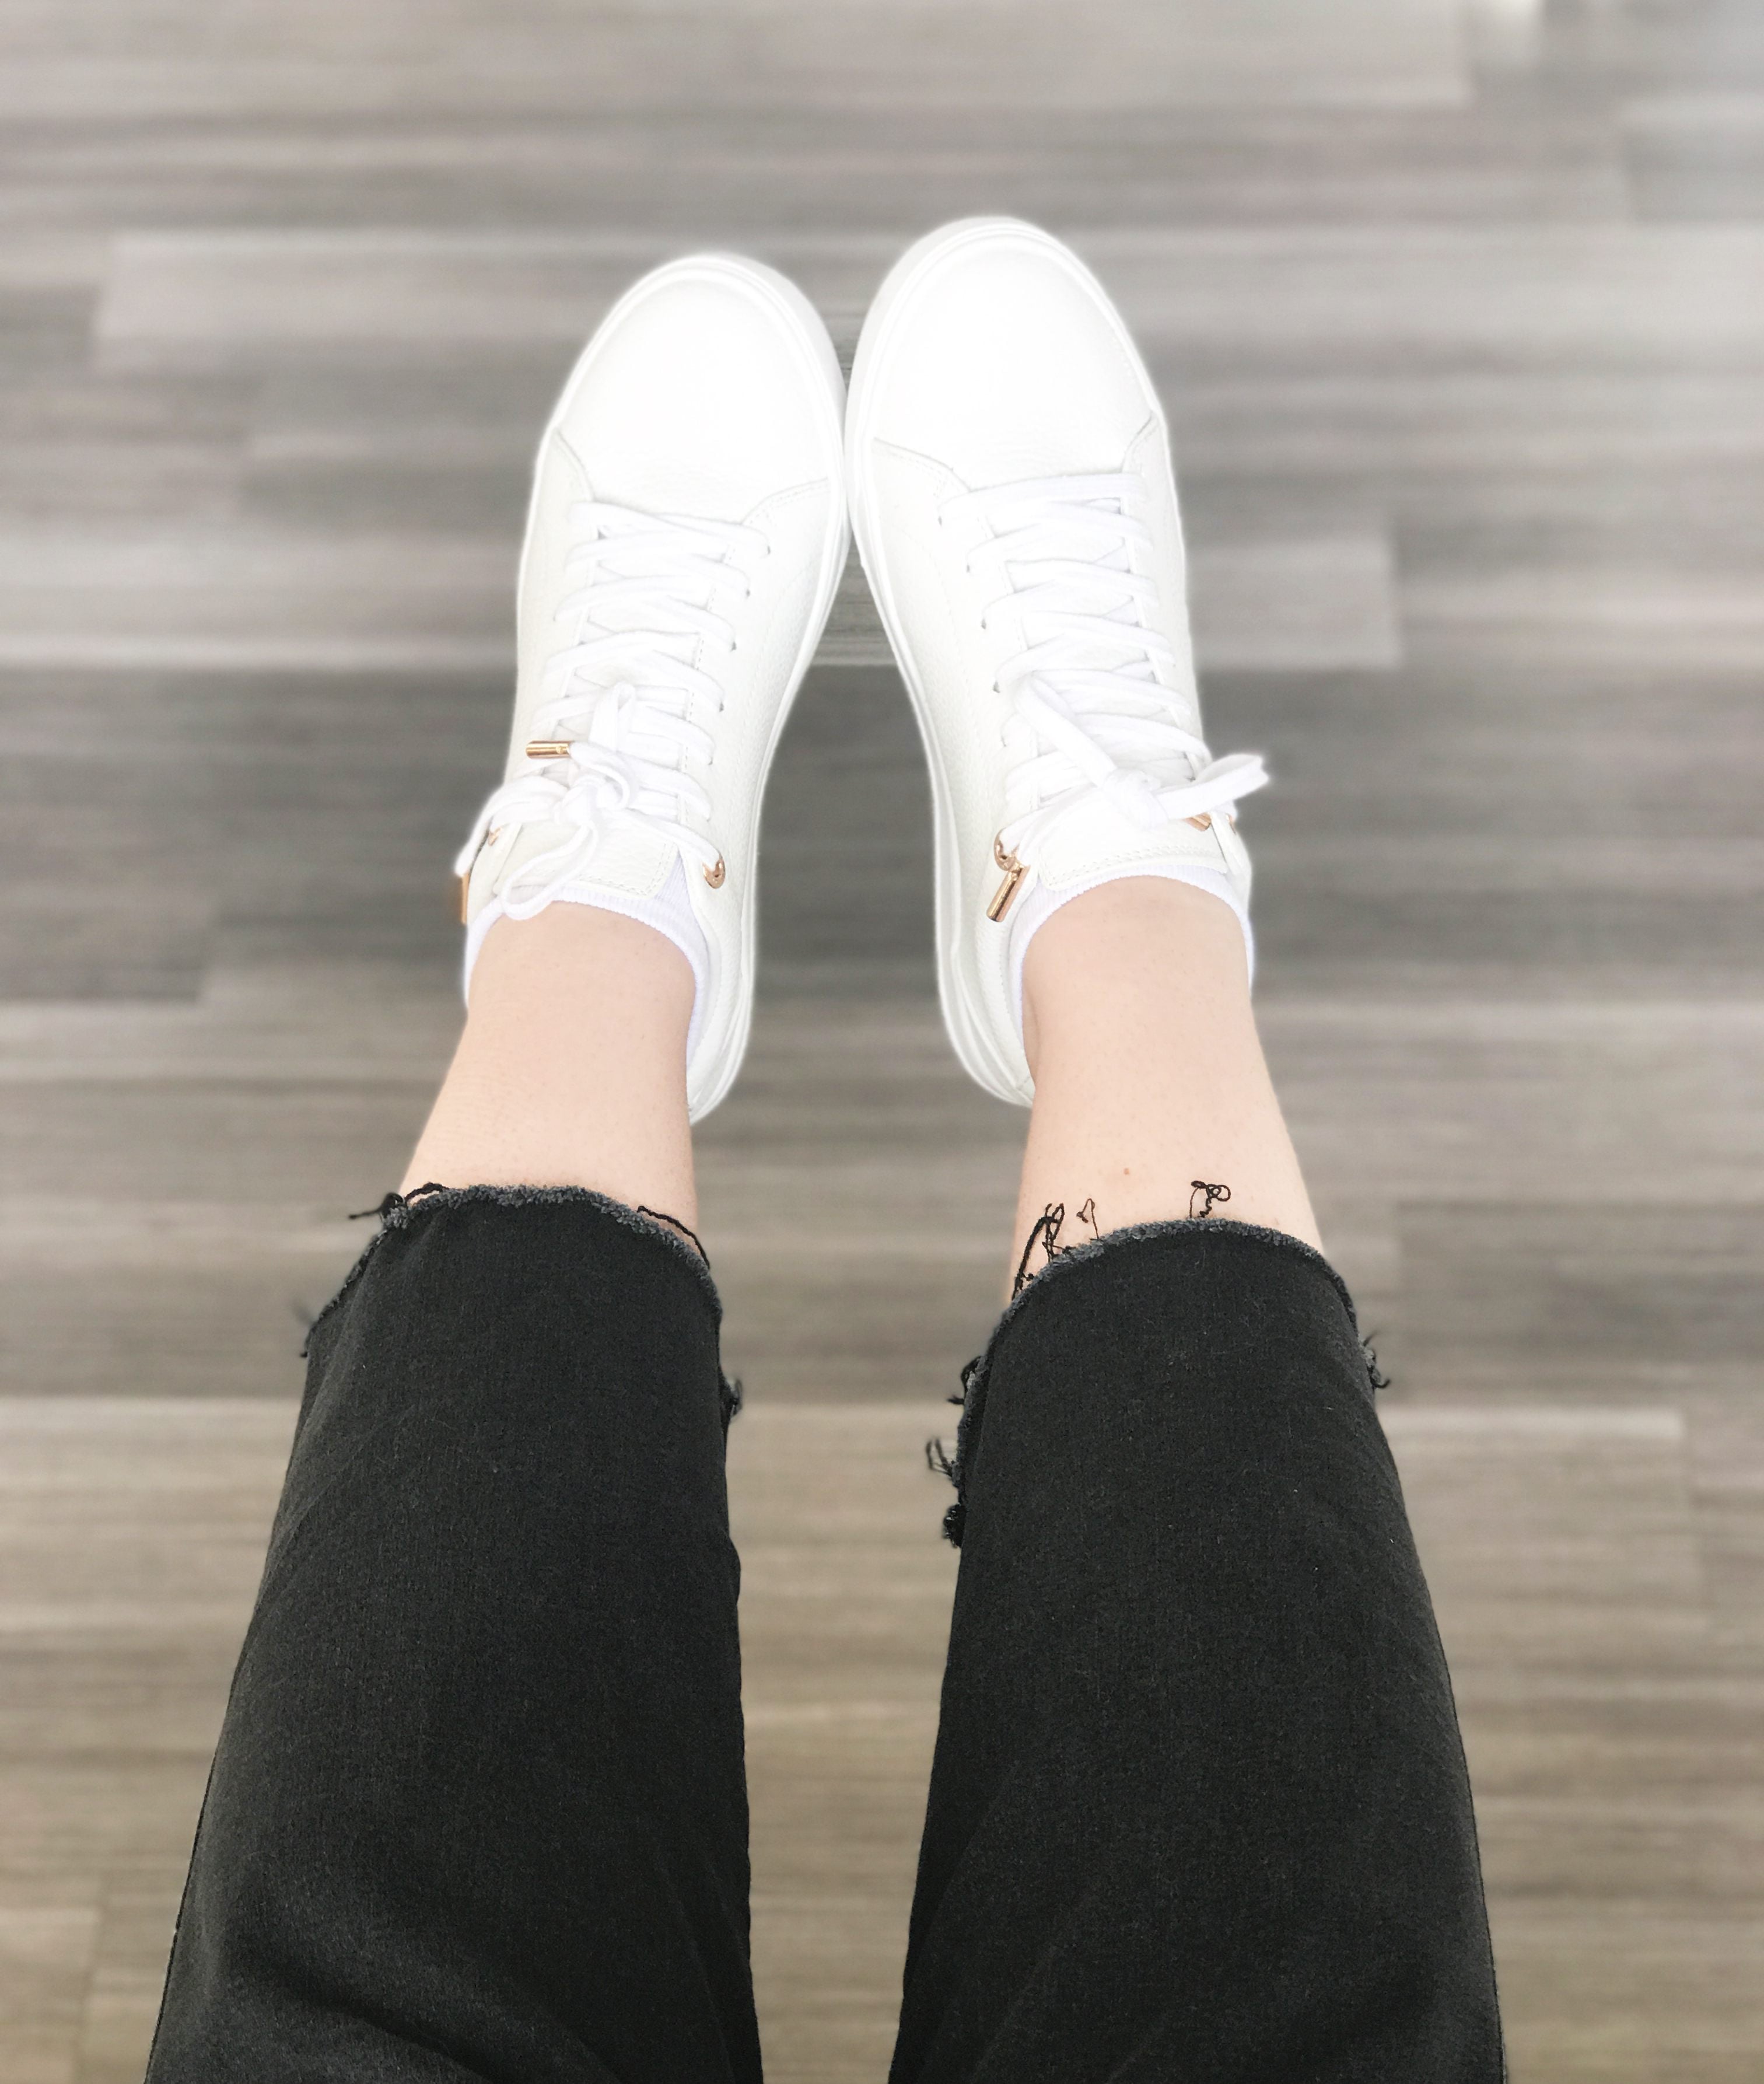 Best White Sneakers | Fashion